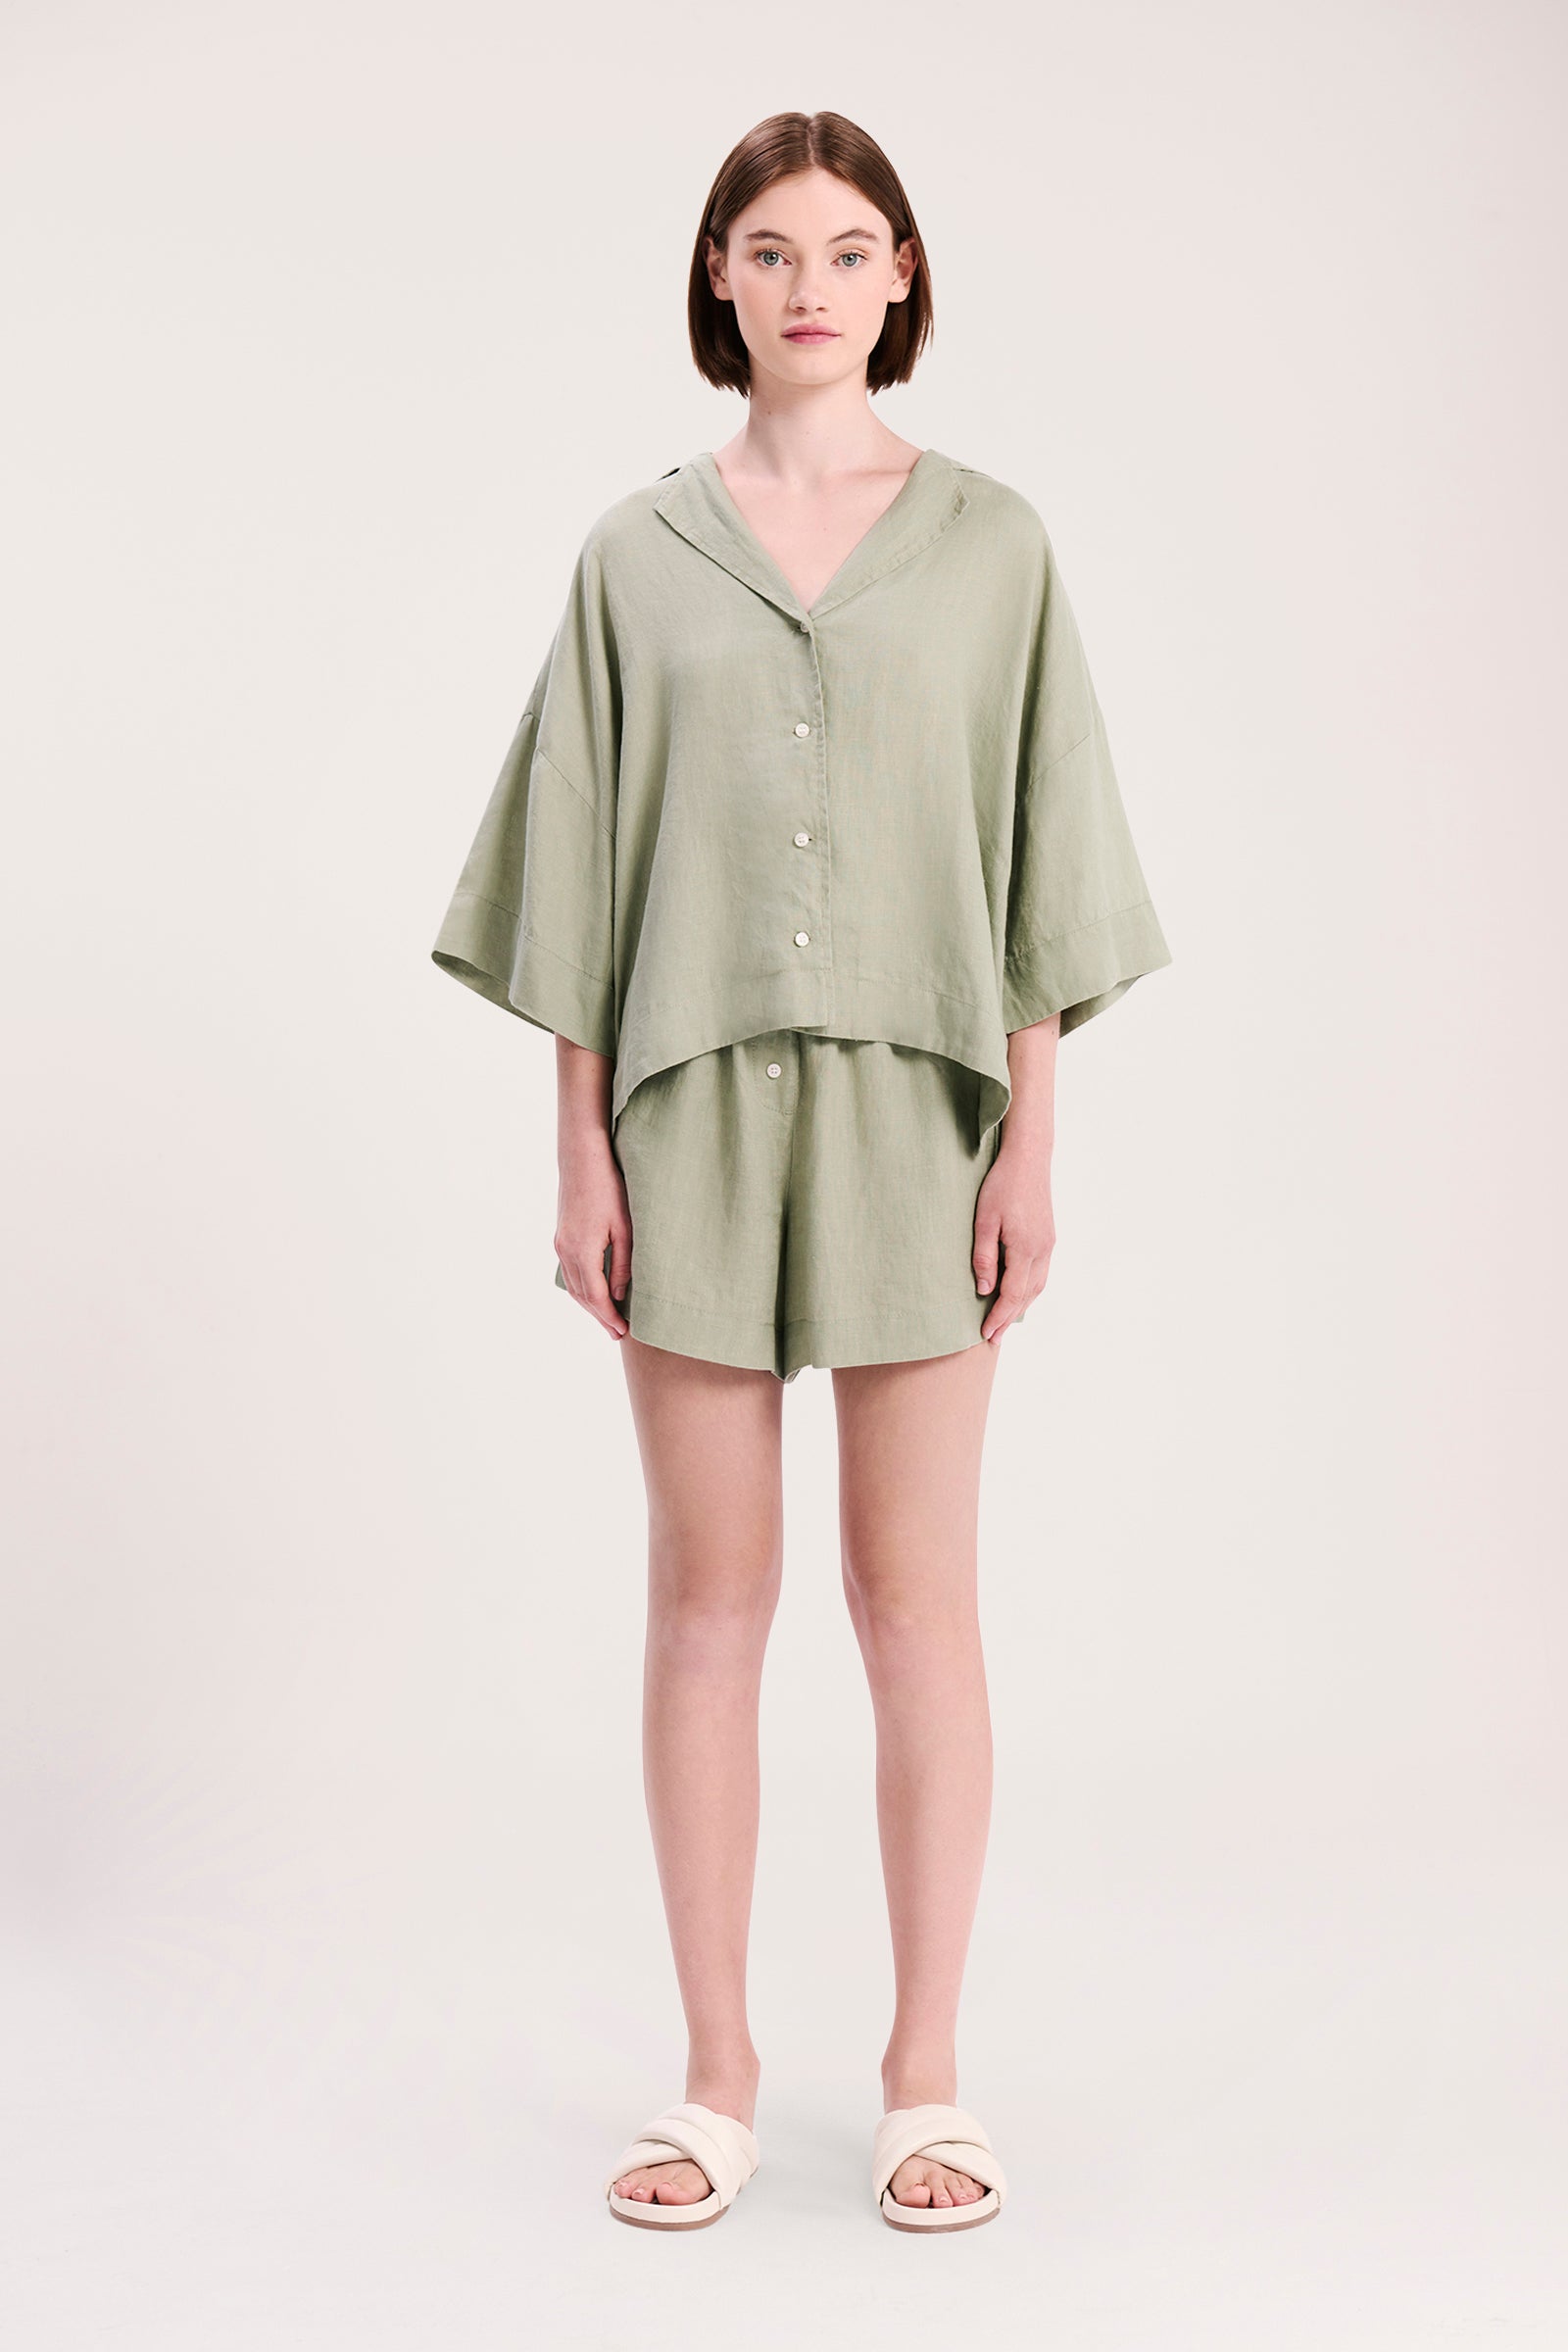 Nude Lucy Lounge Linen Short In Olive 